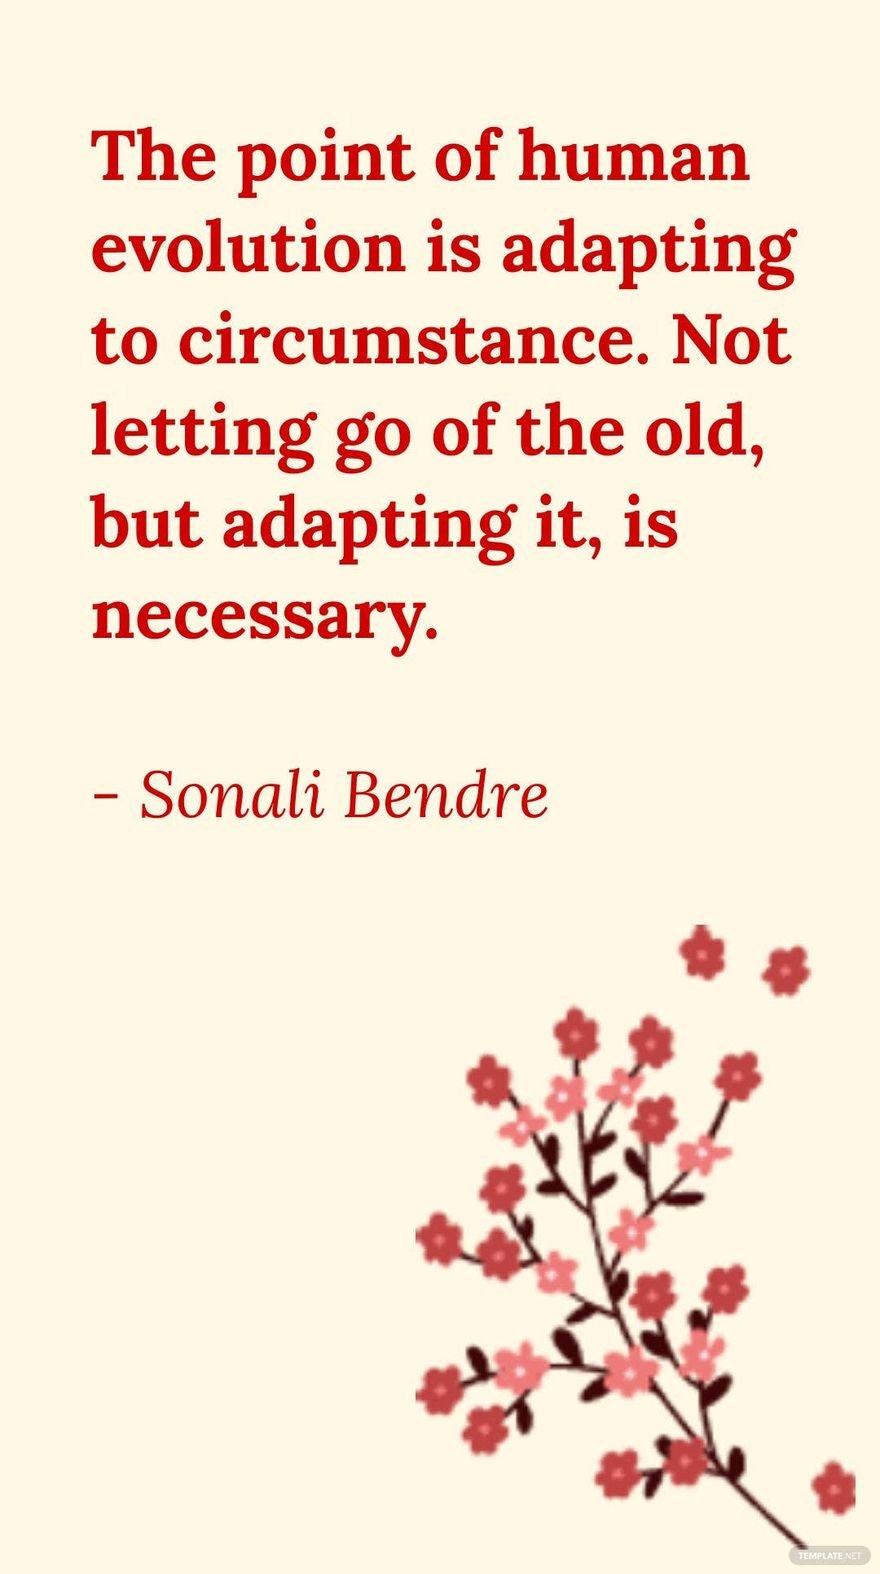 Sonali Bendre - The point of human evolution is adapting to circumstance. Not letting go of the old, but adapting it, is necessary.